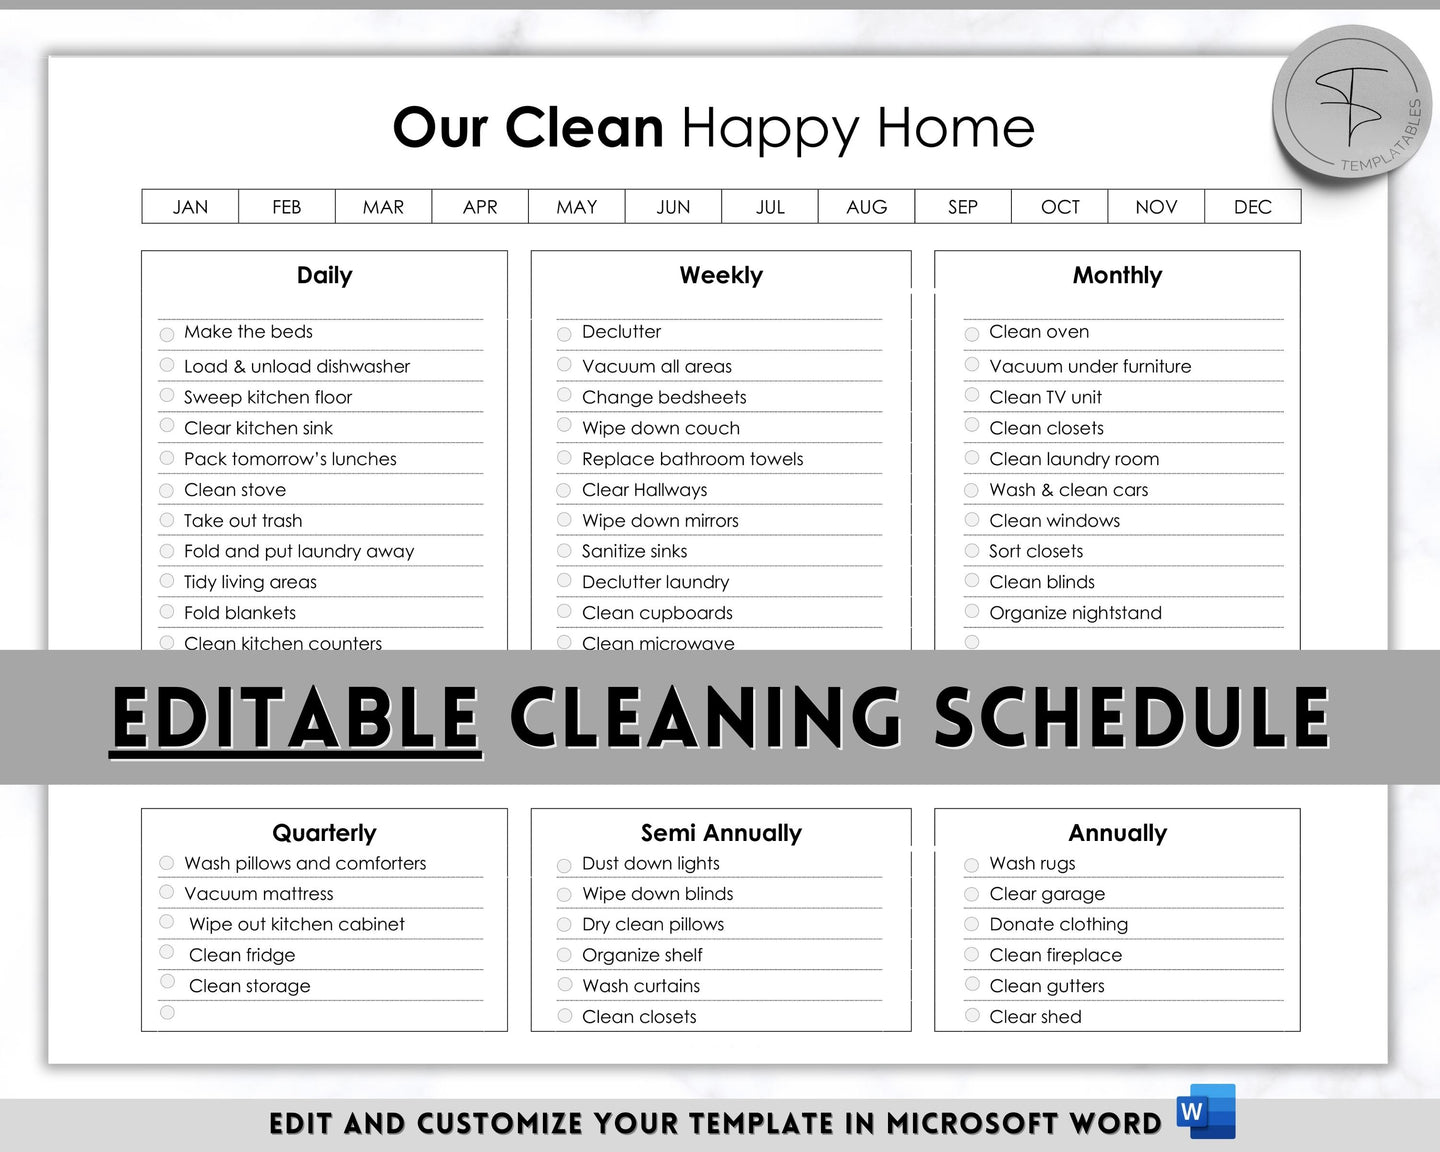 Editable 'Our Clean Happy Home' Cleaning Schedule & Housekeeping Checklist for House Chores | Mono